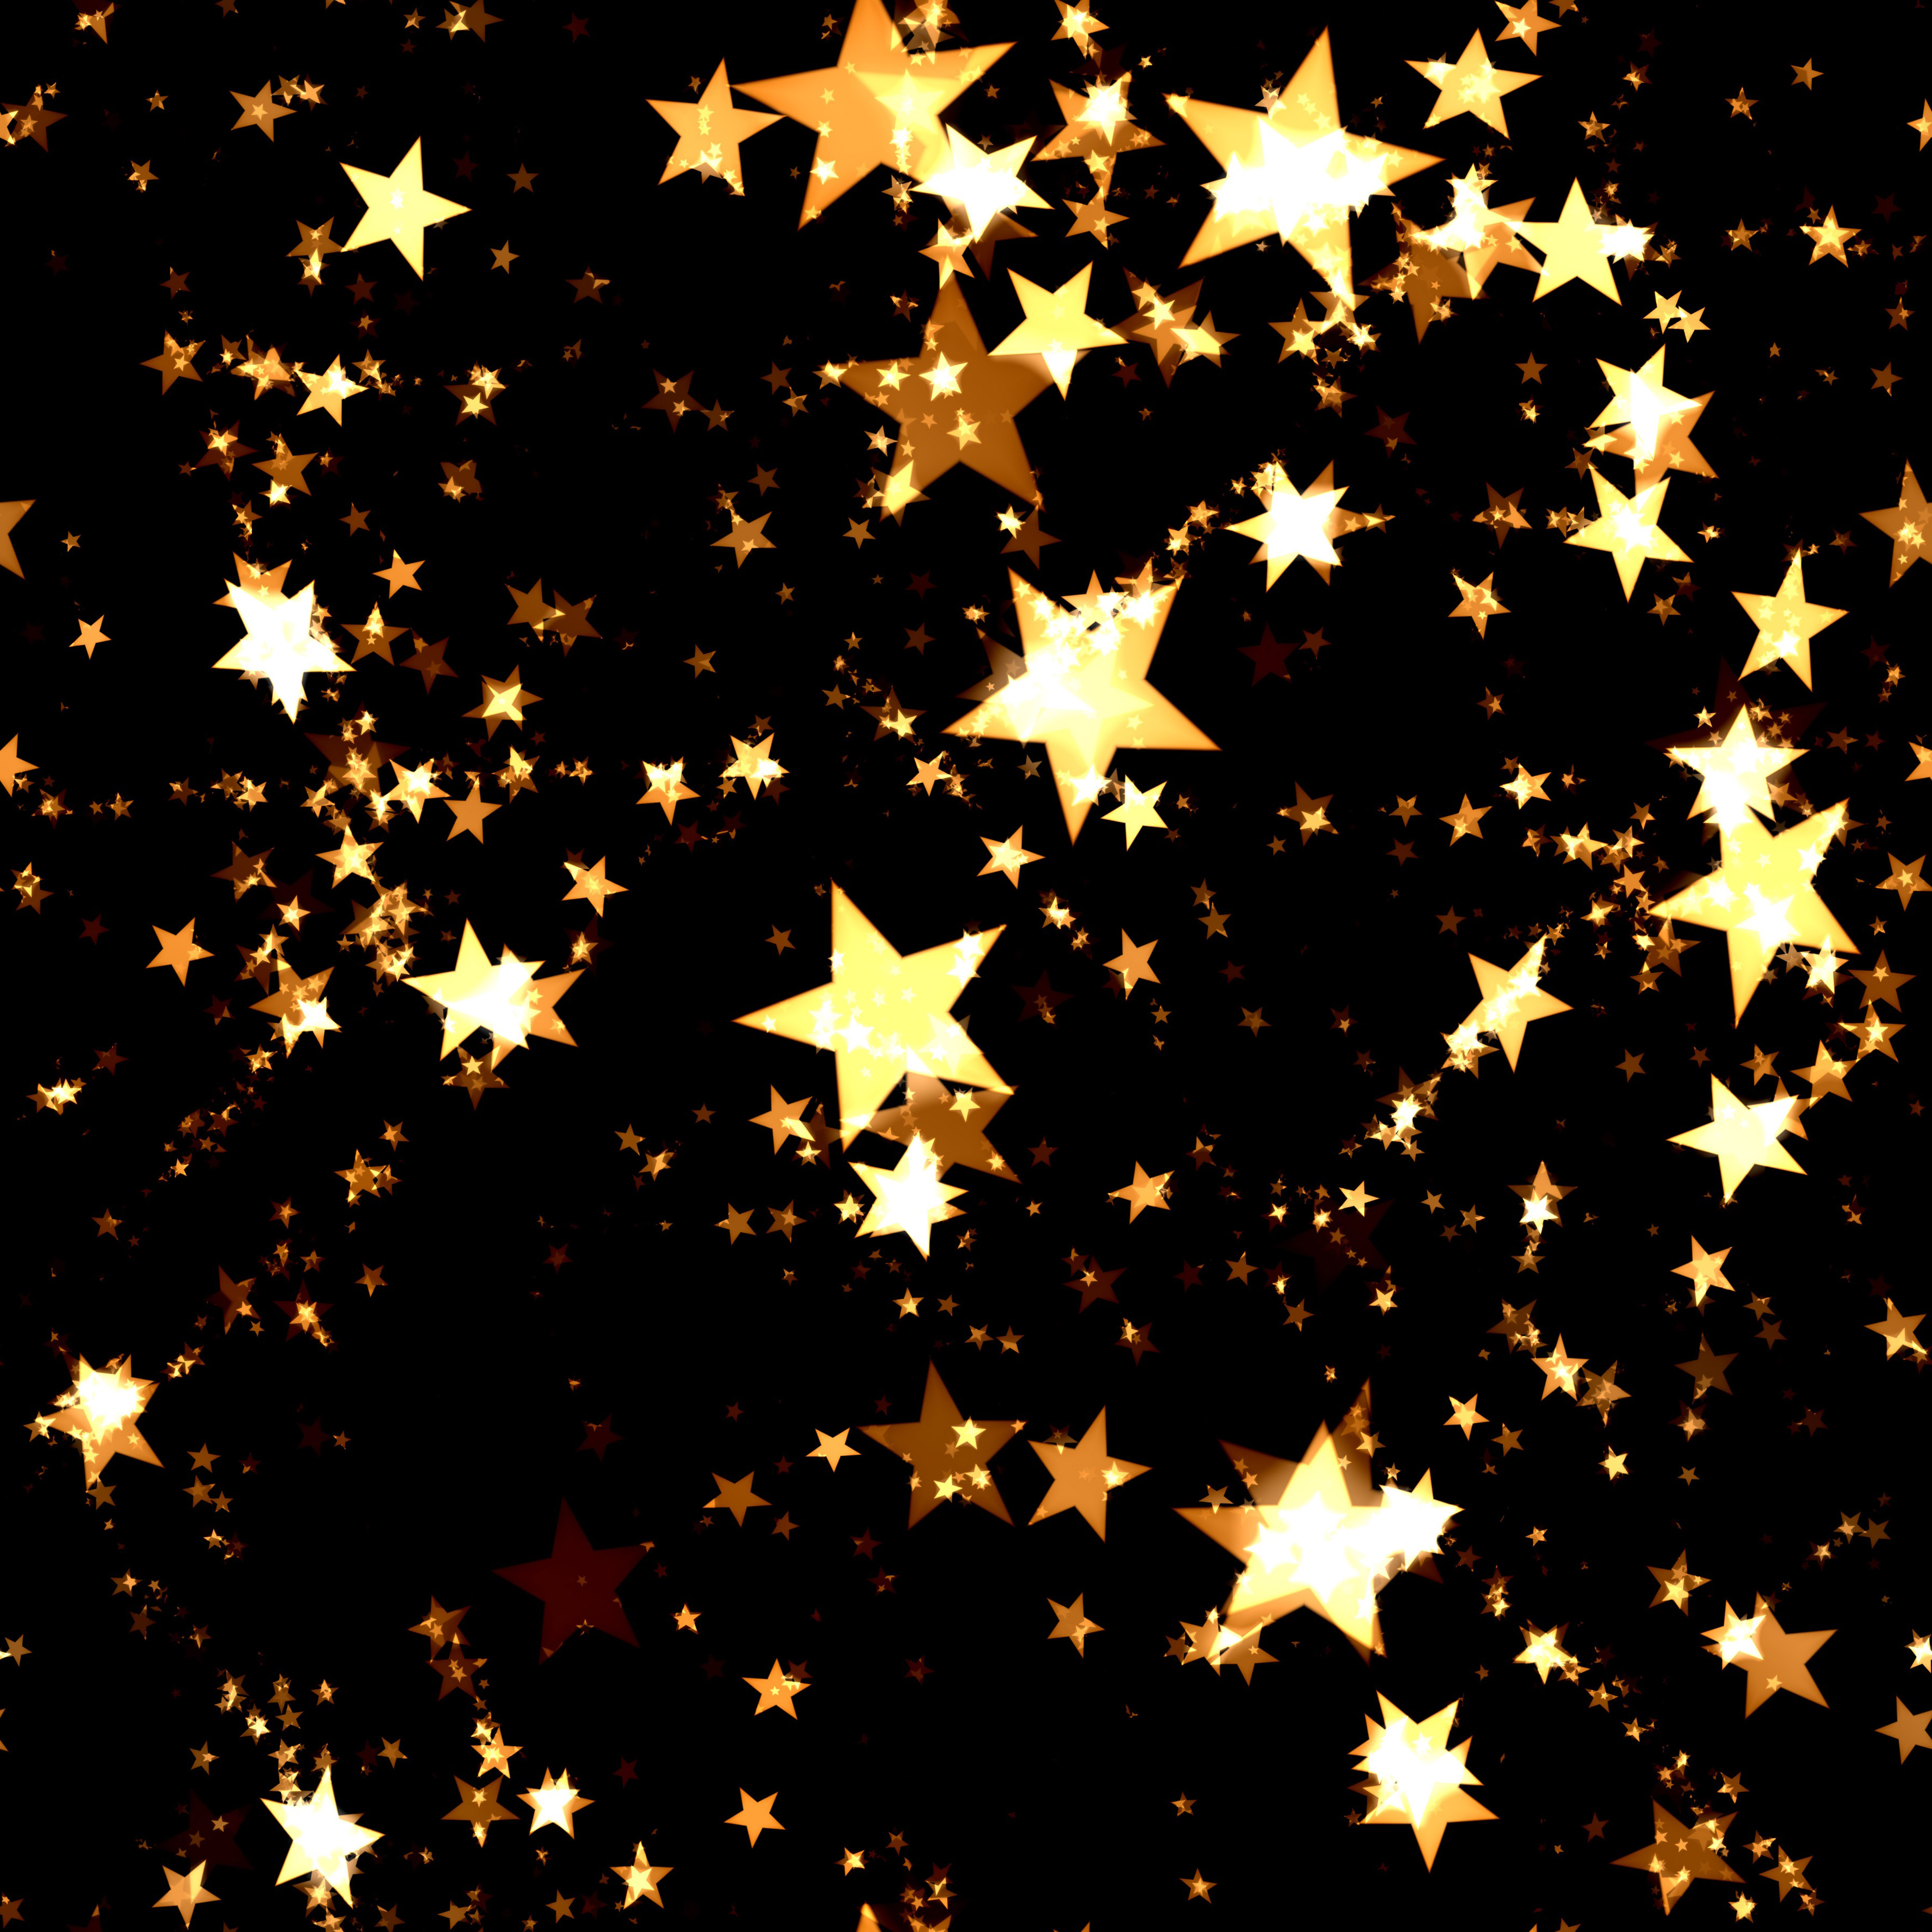 bright gold stars background image | www.myfreetextures.com | 1500 ...